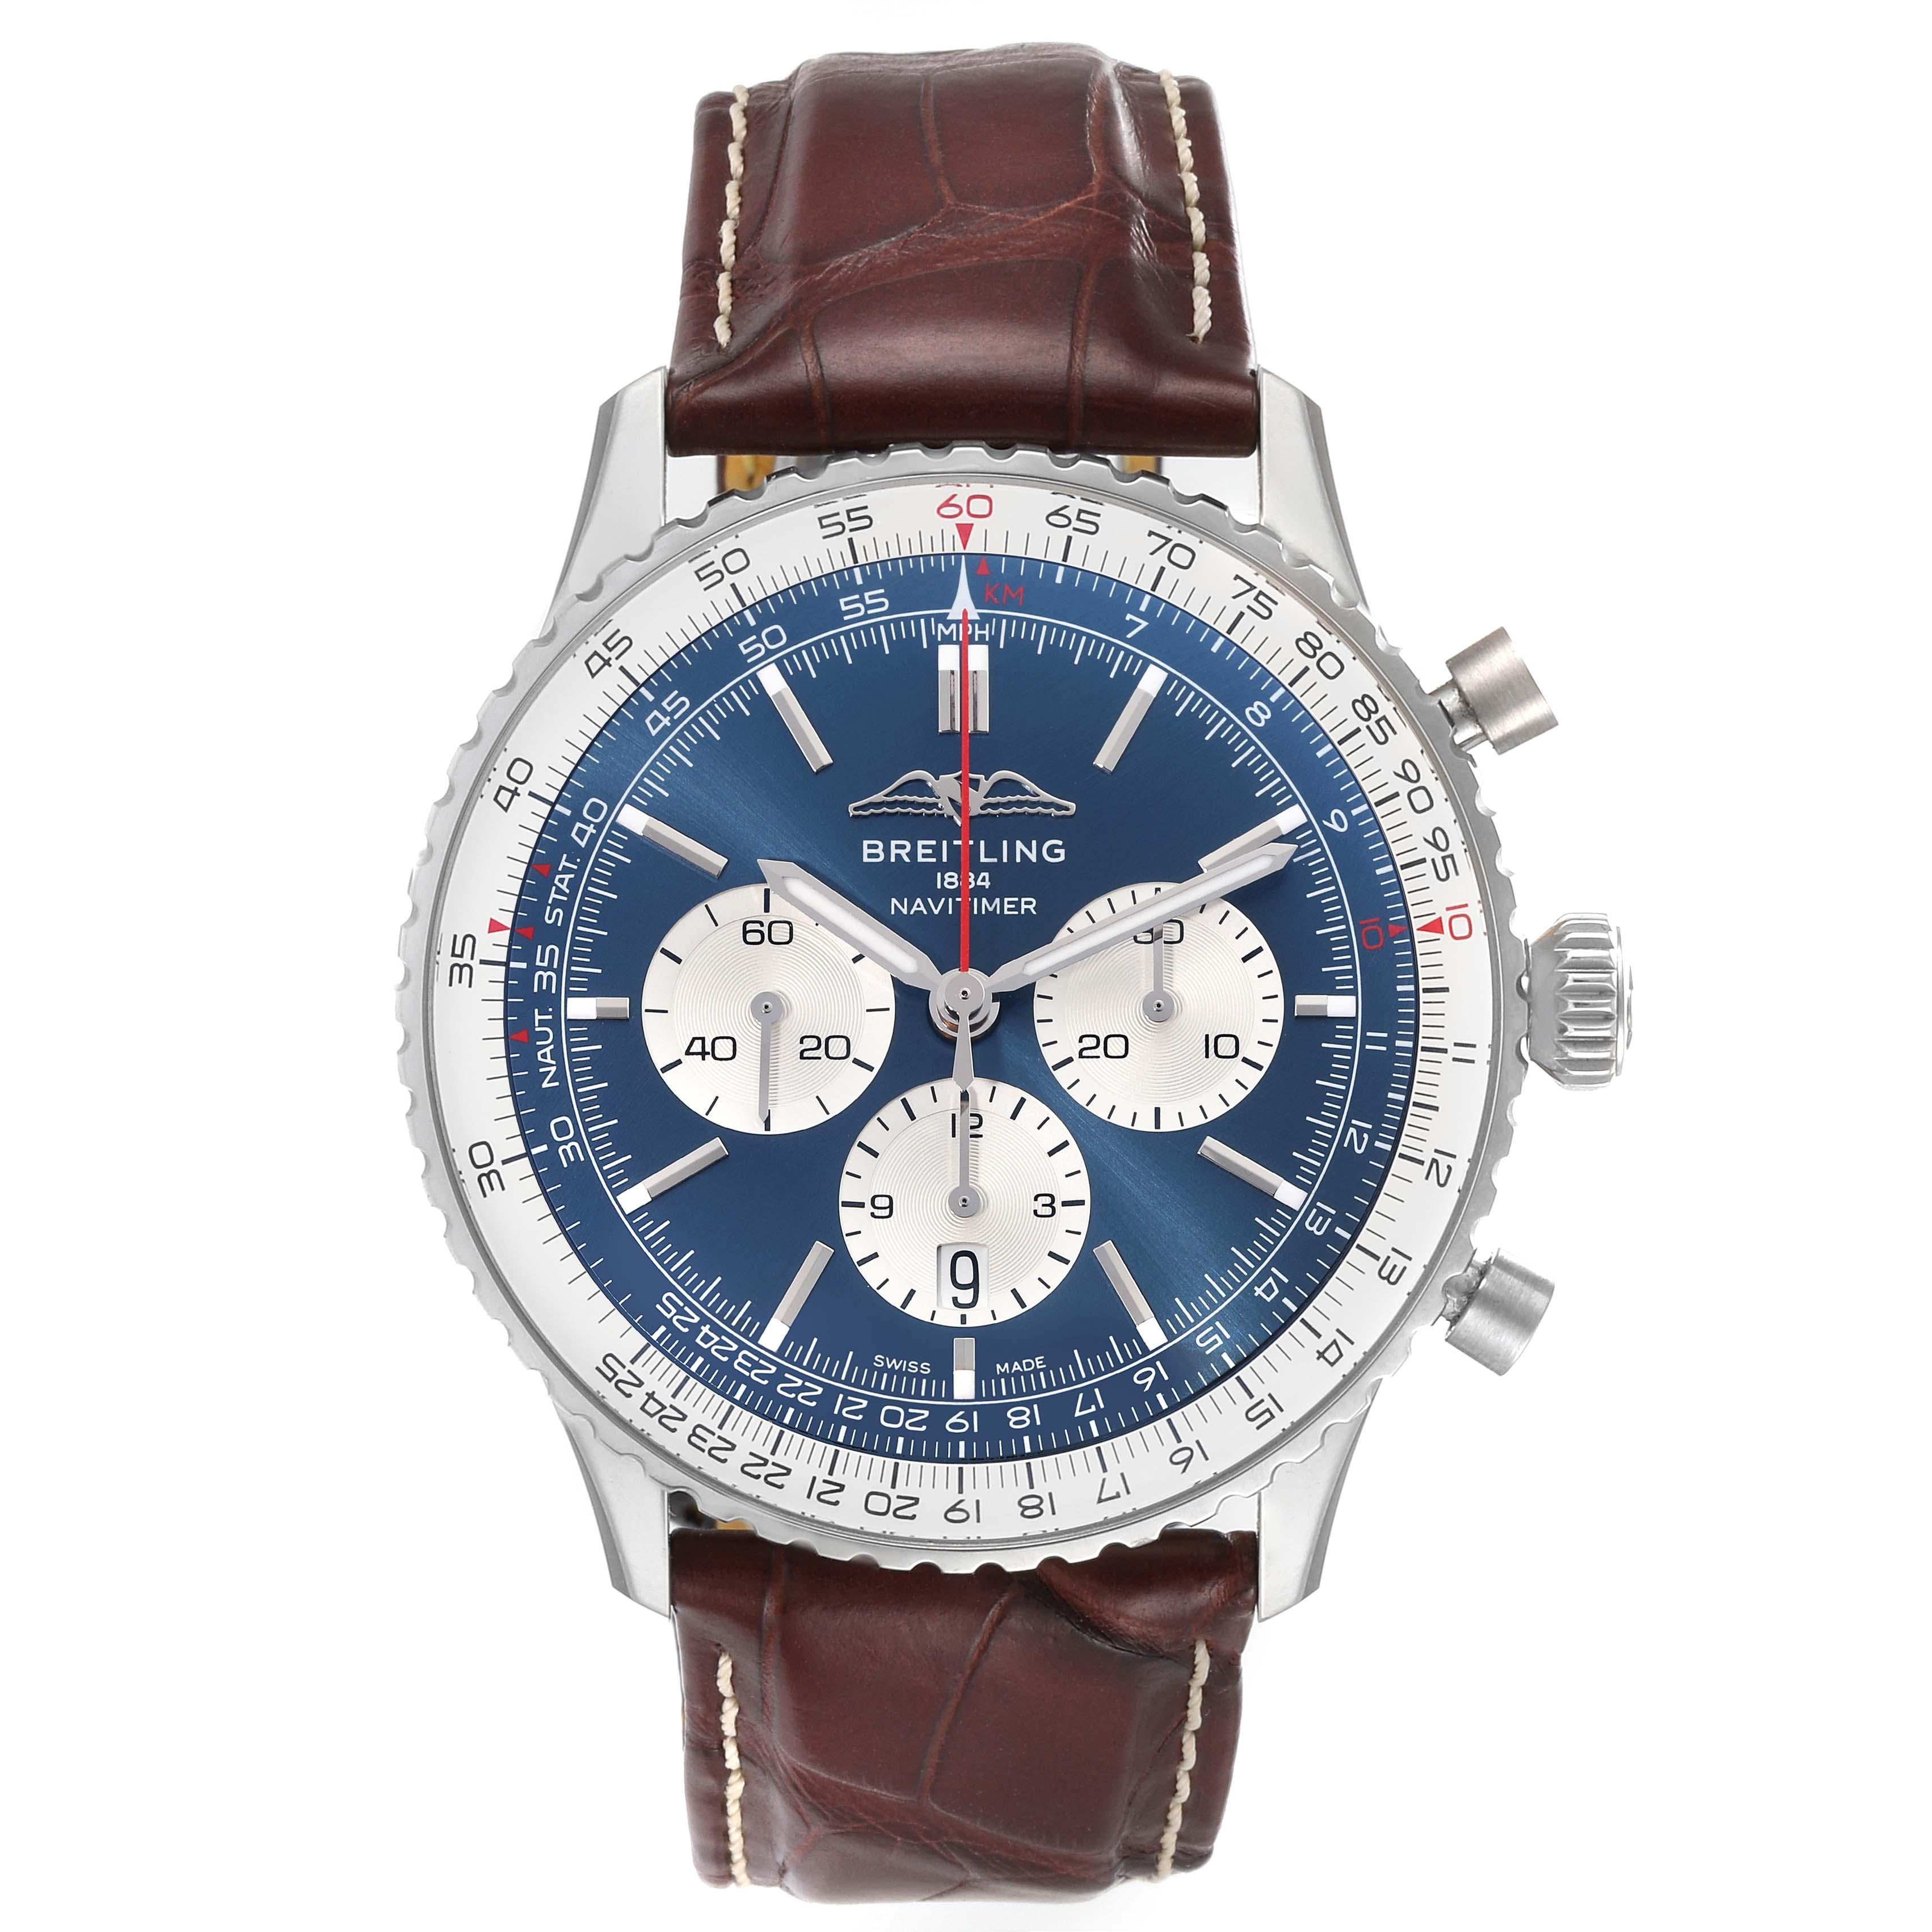 Breitling Navitimer 01 Blue Dial Steel Mens Watch AB0137 Box Card. Self-winding automatic officially certified chronometer movement. Chronograph function. Stainless steel case 46 mm in diameter. Case thickness 13.9 mm. Transparent exhibition